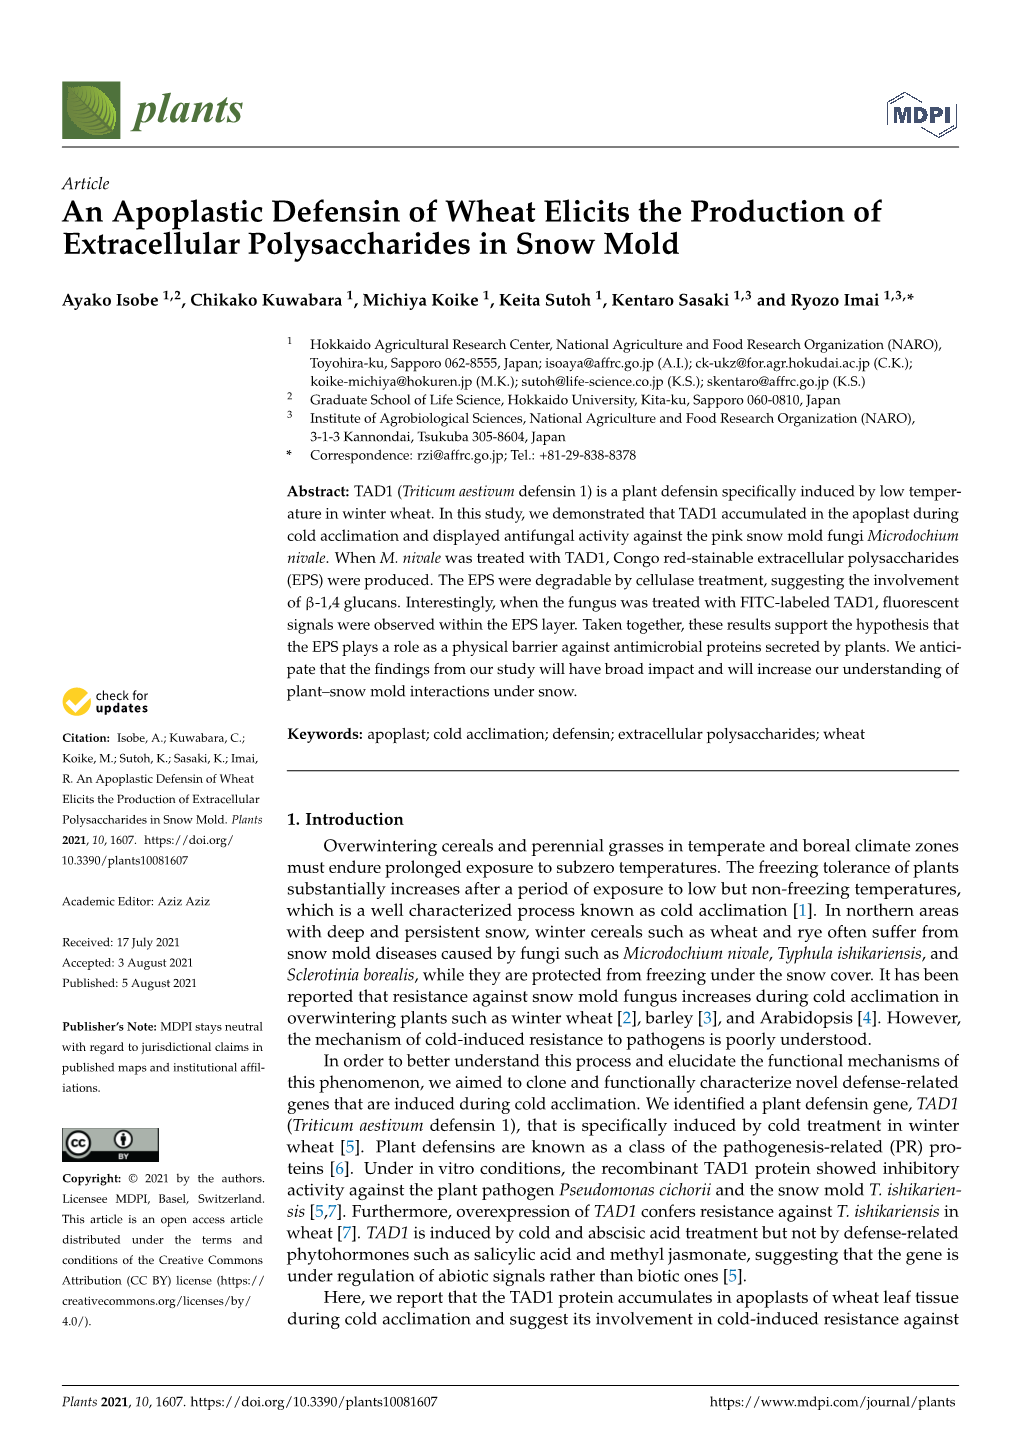 An Apoplastic Defensin of Wheat Elicits the Production of Extracellular Polysaccharides in Snow Mold